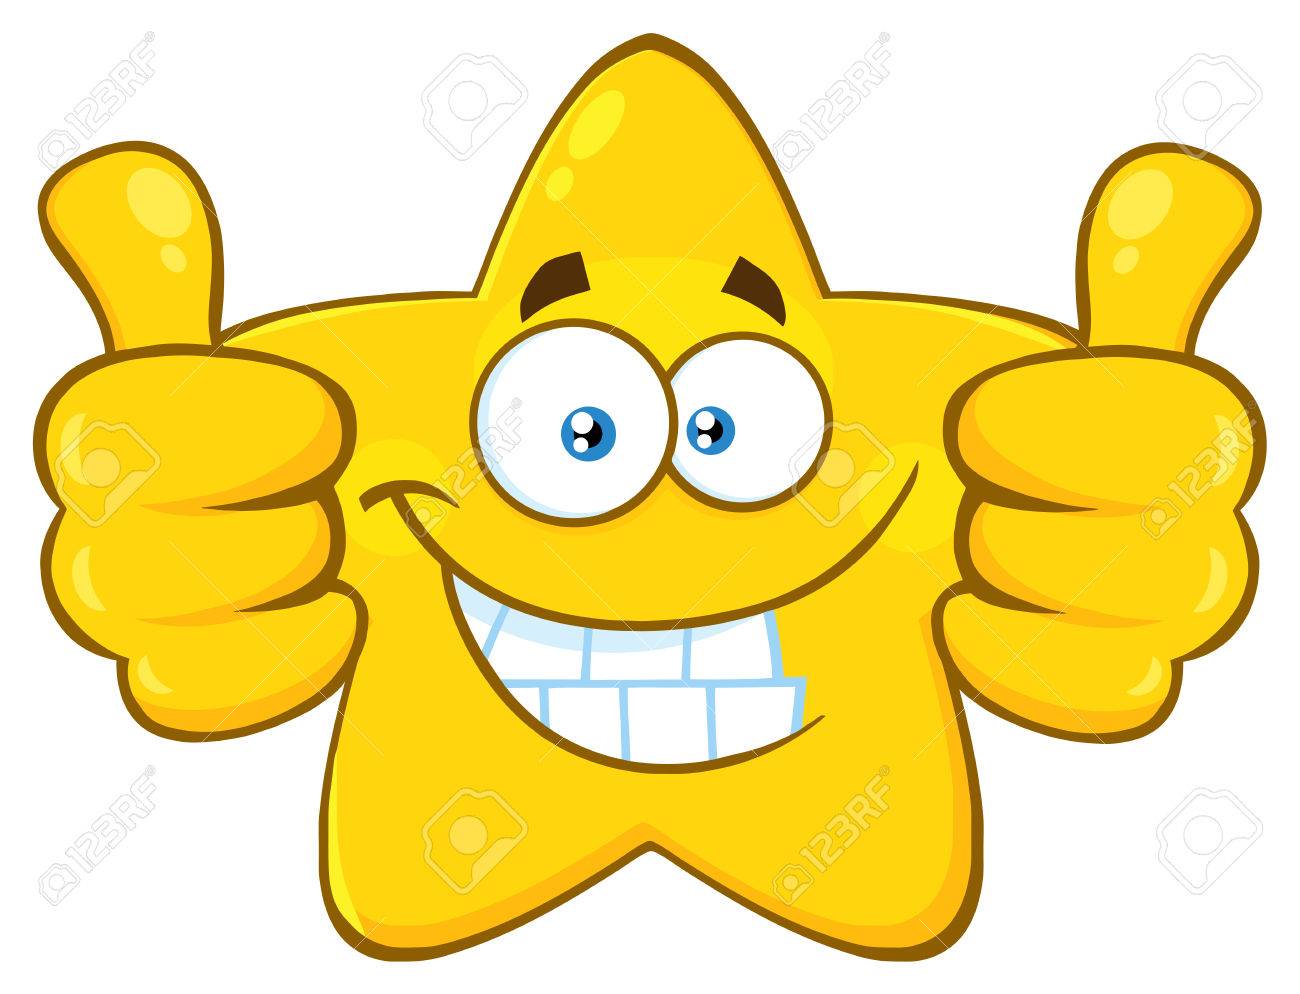 79630232-smiling-yellow-star-cartoon-emoji-face-character-giving-two-thumbs-up-illustration-isolated-on-white.jpg